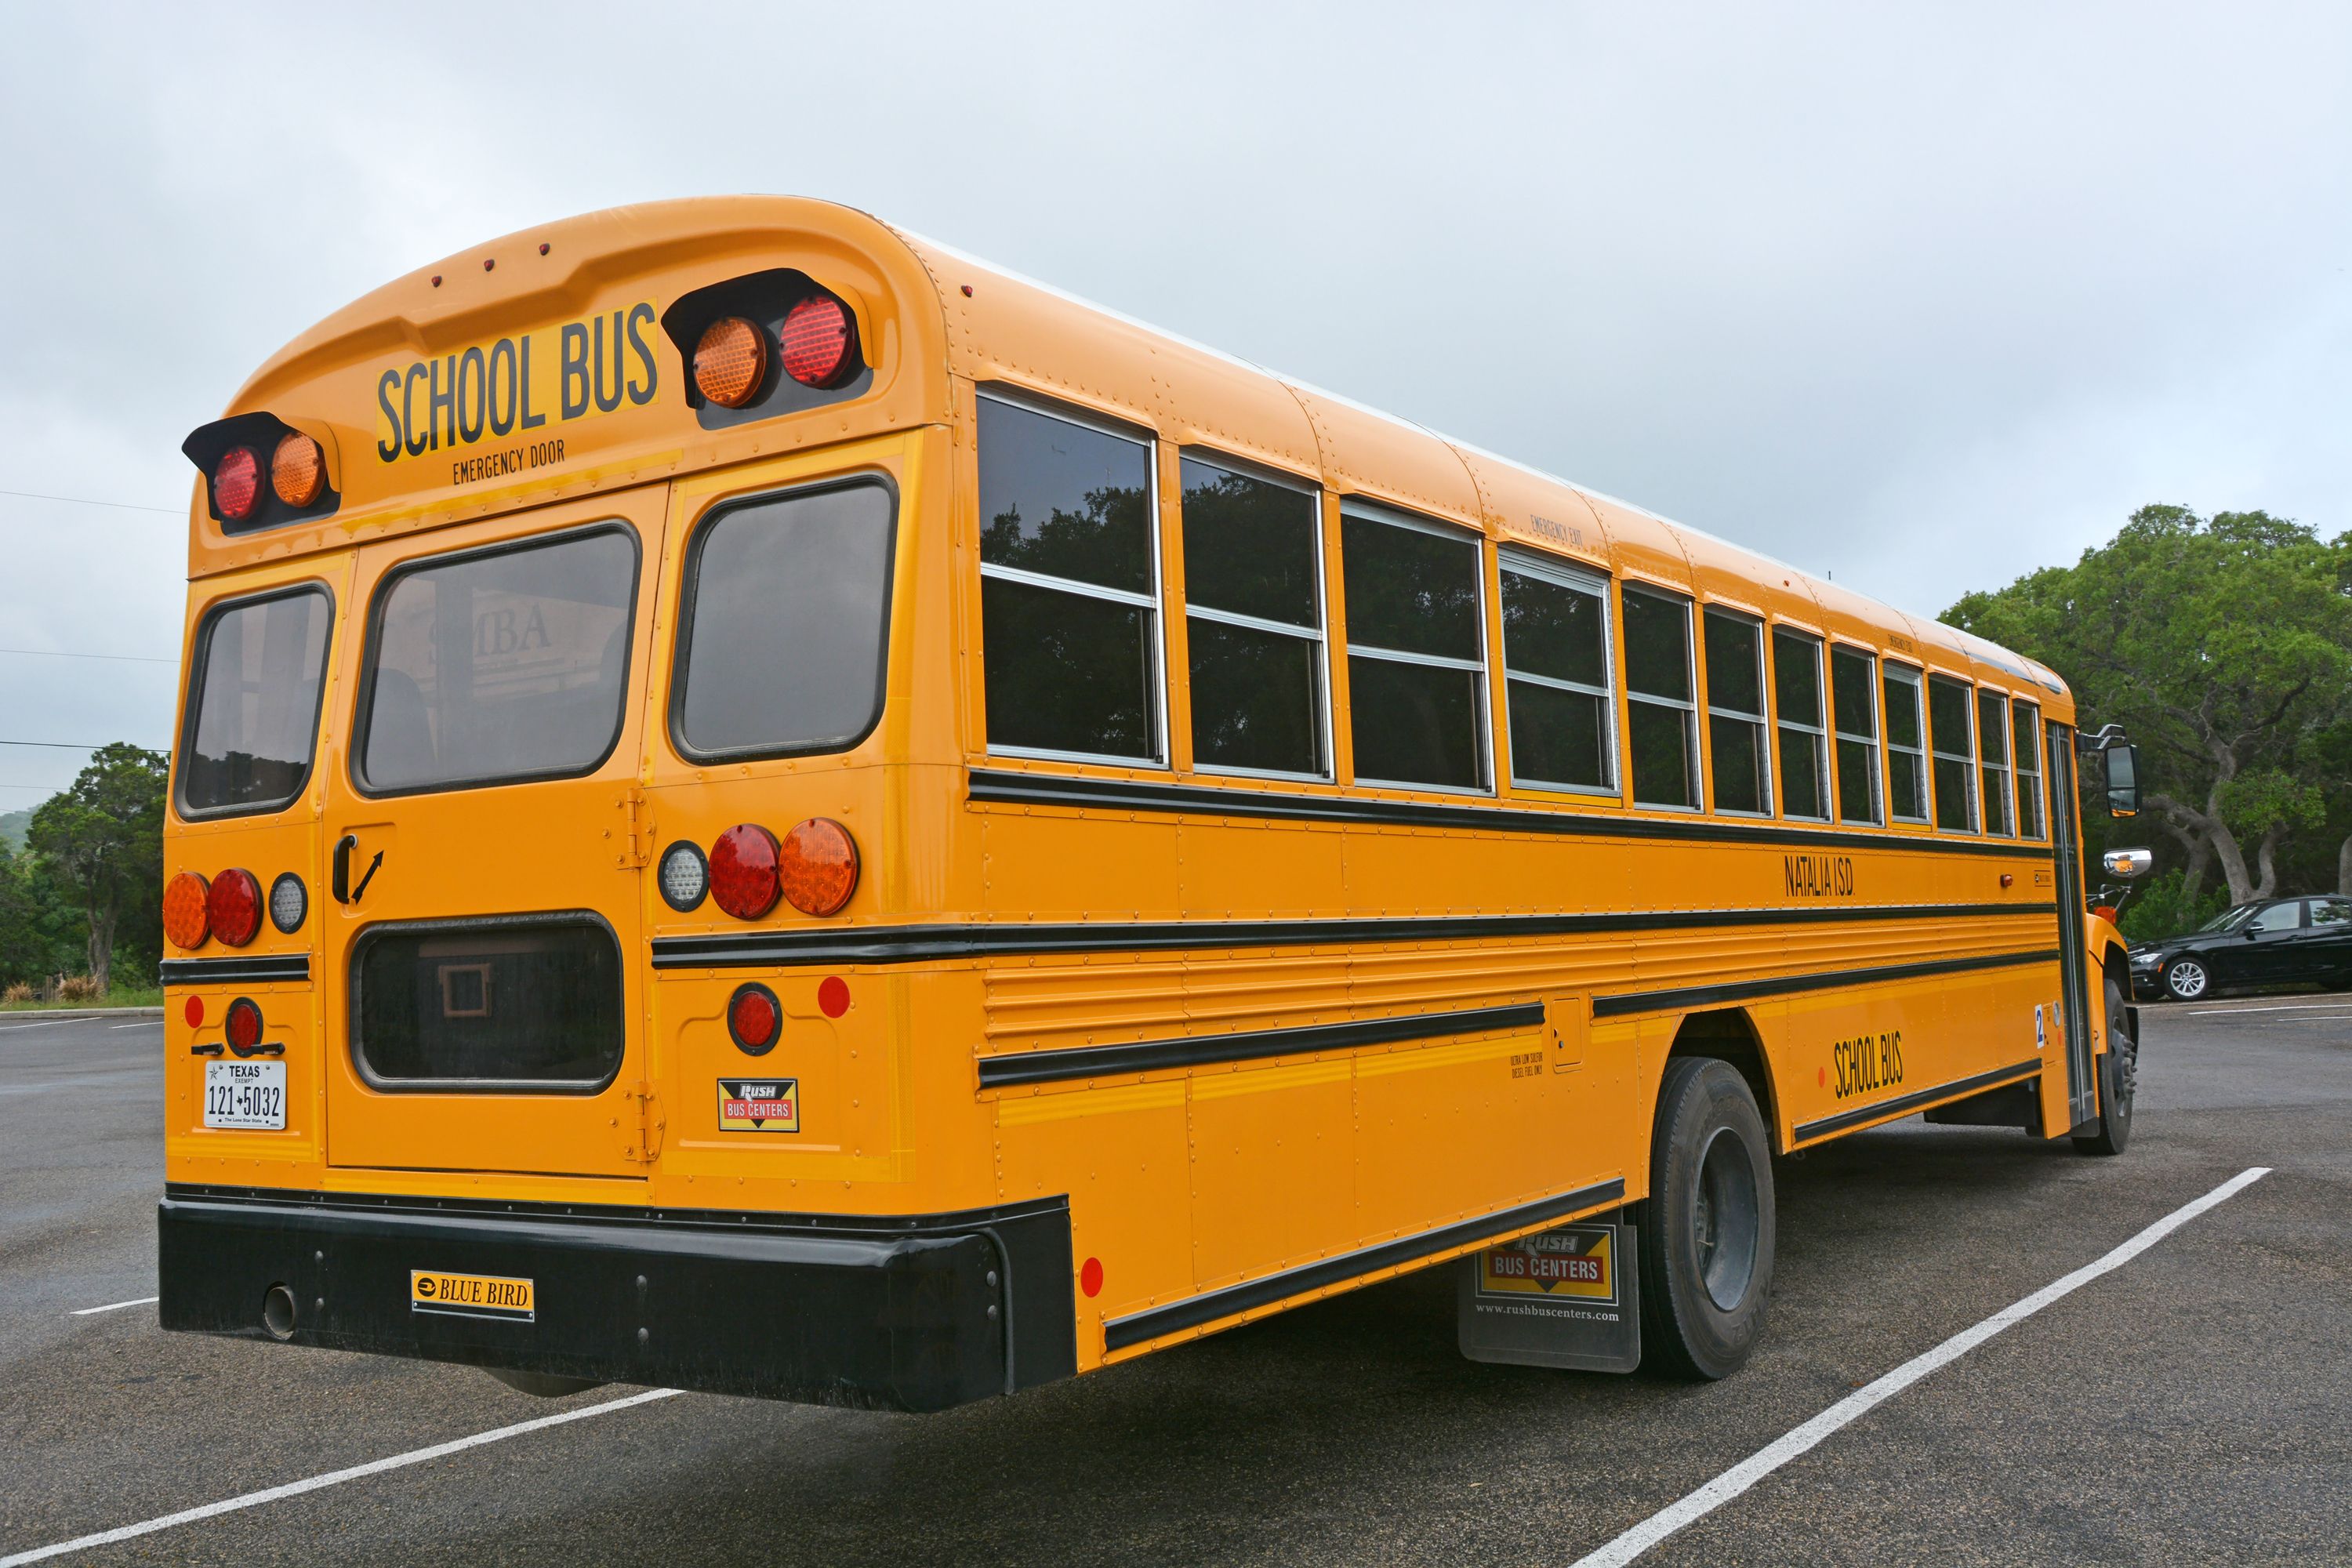 Yellow school bus at a parking lot in San Antonio, Texas. Image by Kokoulina / Shutterstock. United States, 2016.